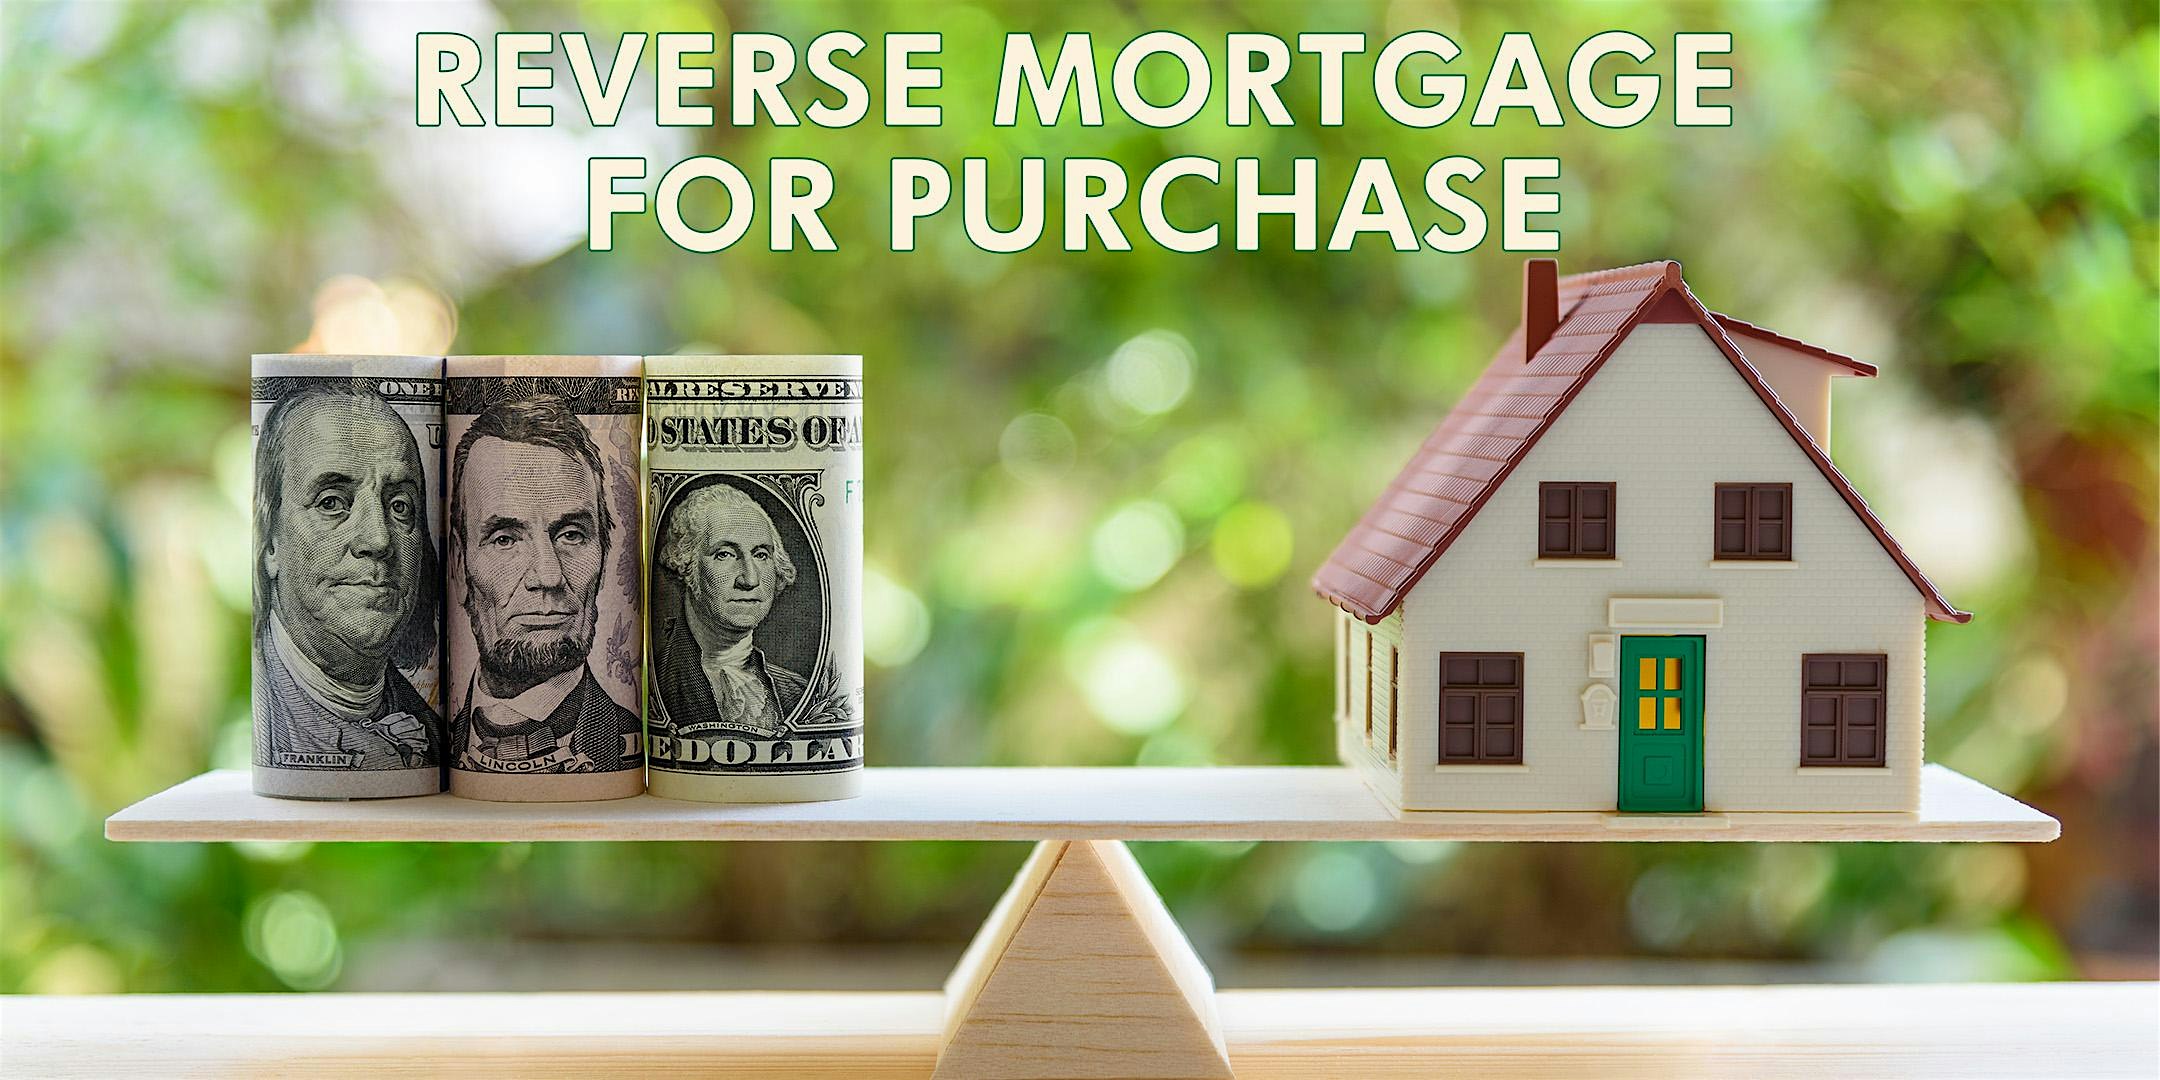 Reverse Mortgage for Purchase - 2CE